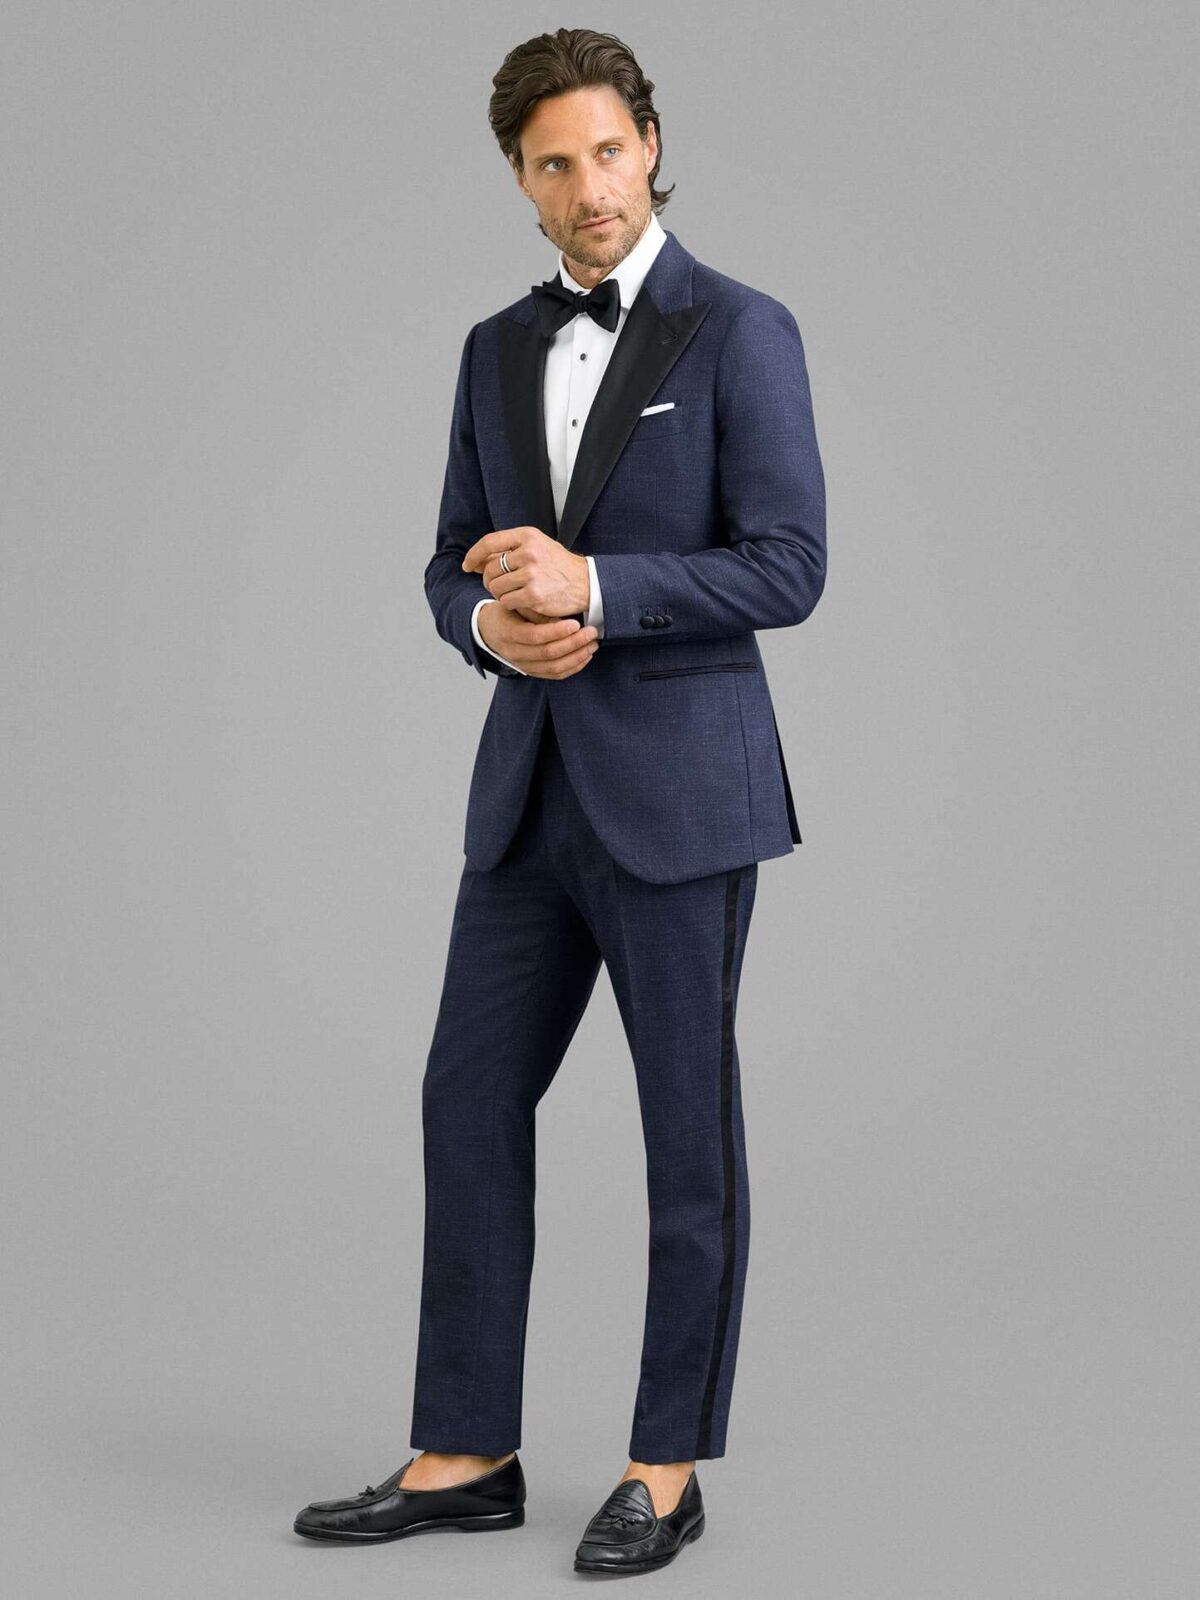 Peak Lapel Navy Wool and Linen Stretch Tuxedo - Custom Fit Tailored Clothing